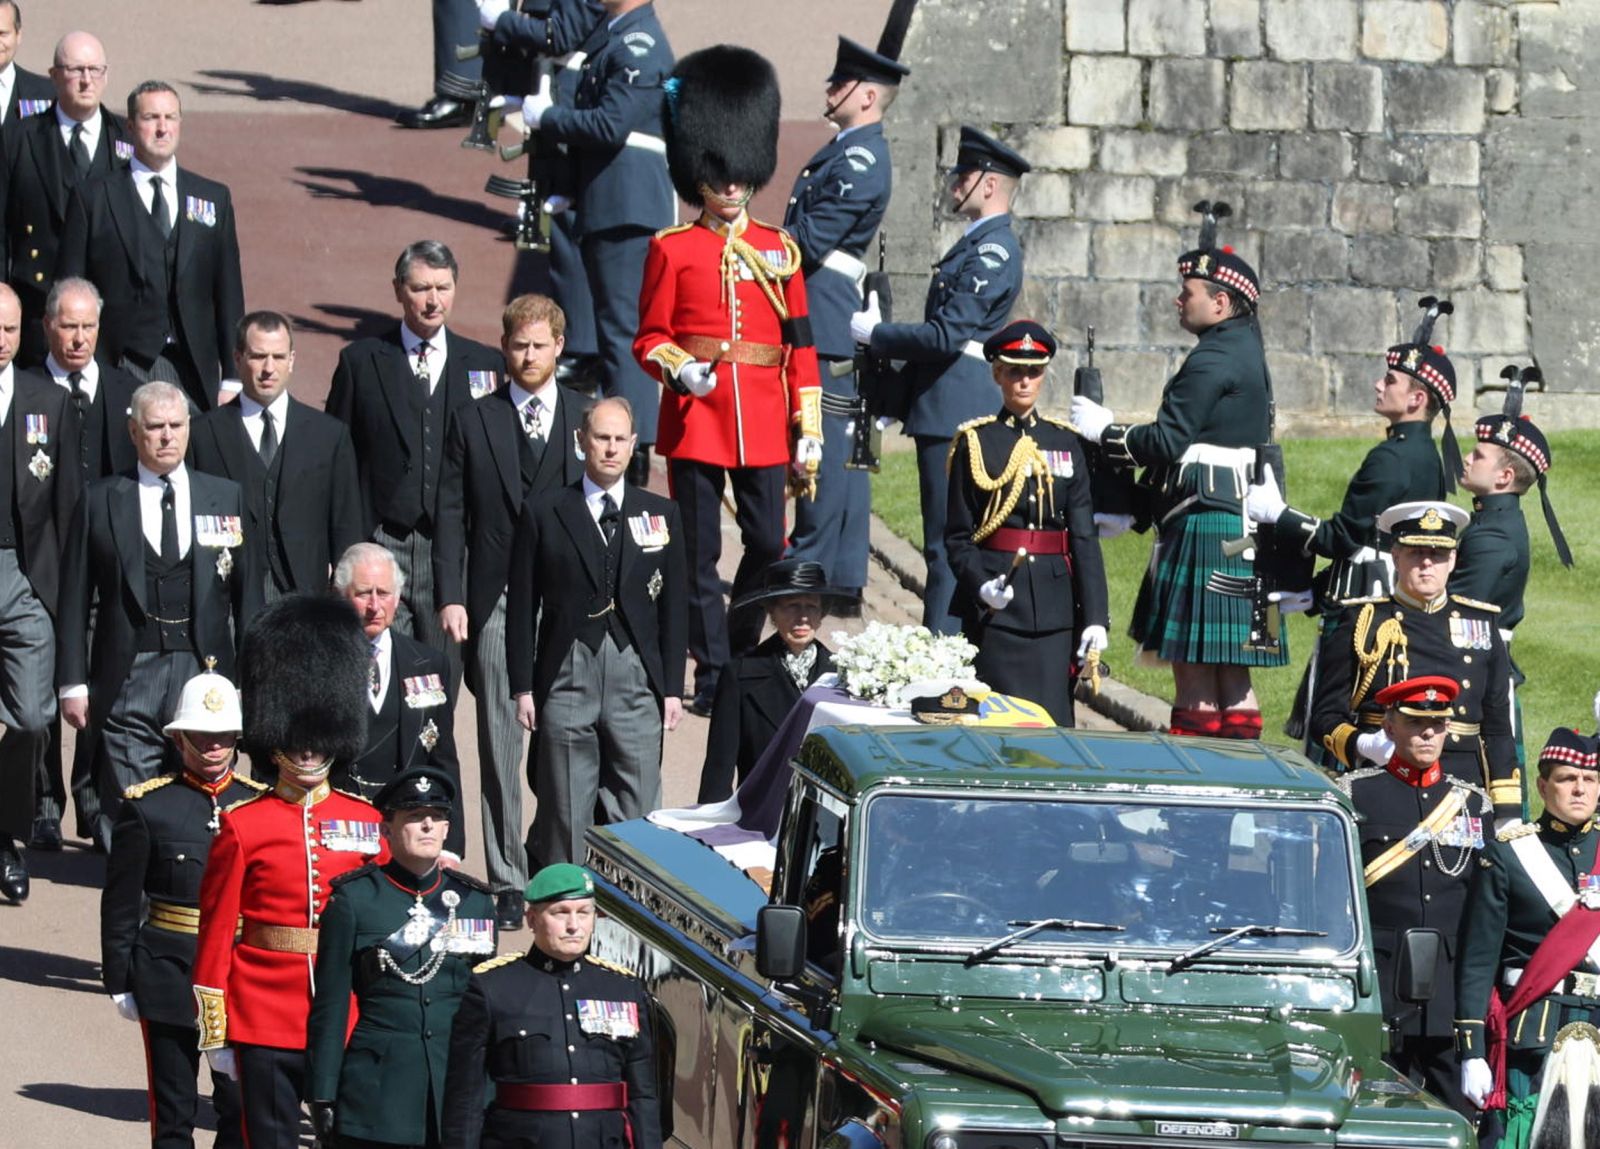 epa09141608 A handout picture provided by the British Ministry of Defence (MOD) shows The Duke Of Edinburgh's coffin on the Land Rover followed by royal family members on their way tof St George’s Chapel at Windsor Castle, in Windsor, Britain, 17 April 2021. More than 730 members of Armed Forces personnel have taken part in the funeral ceremony at Windsor Castle. Britain's Prince Philip, the Duke of Edinburgh, has died on 09 April 2021 aged 99.  EPA/Dave Jenkins/HANDOUT MANDATORY CREDIT: MOD/CROWN COPYRIGHT HANDOUT EDITORIAL USE ONLY/NO SALES